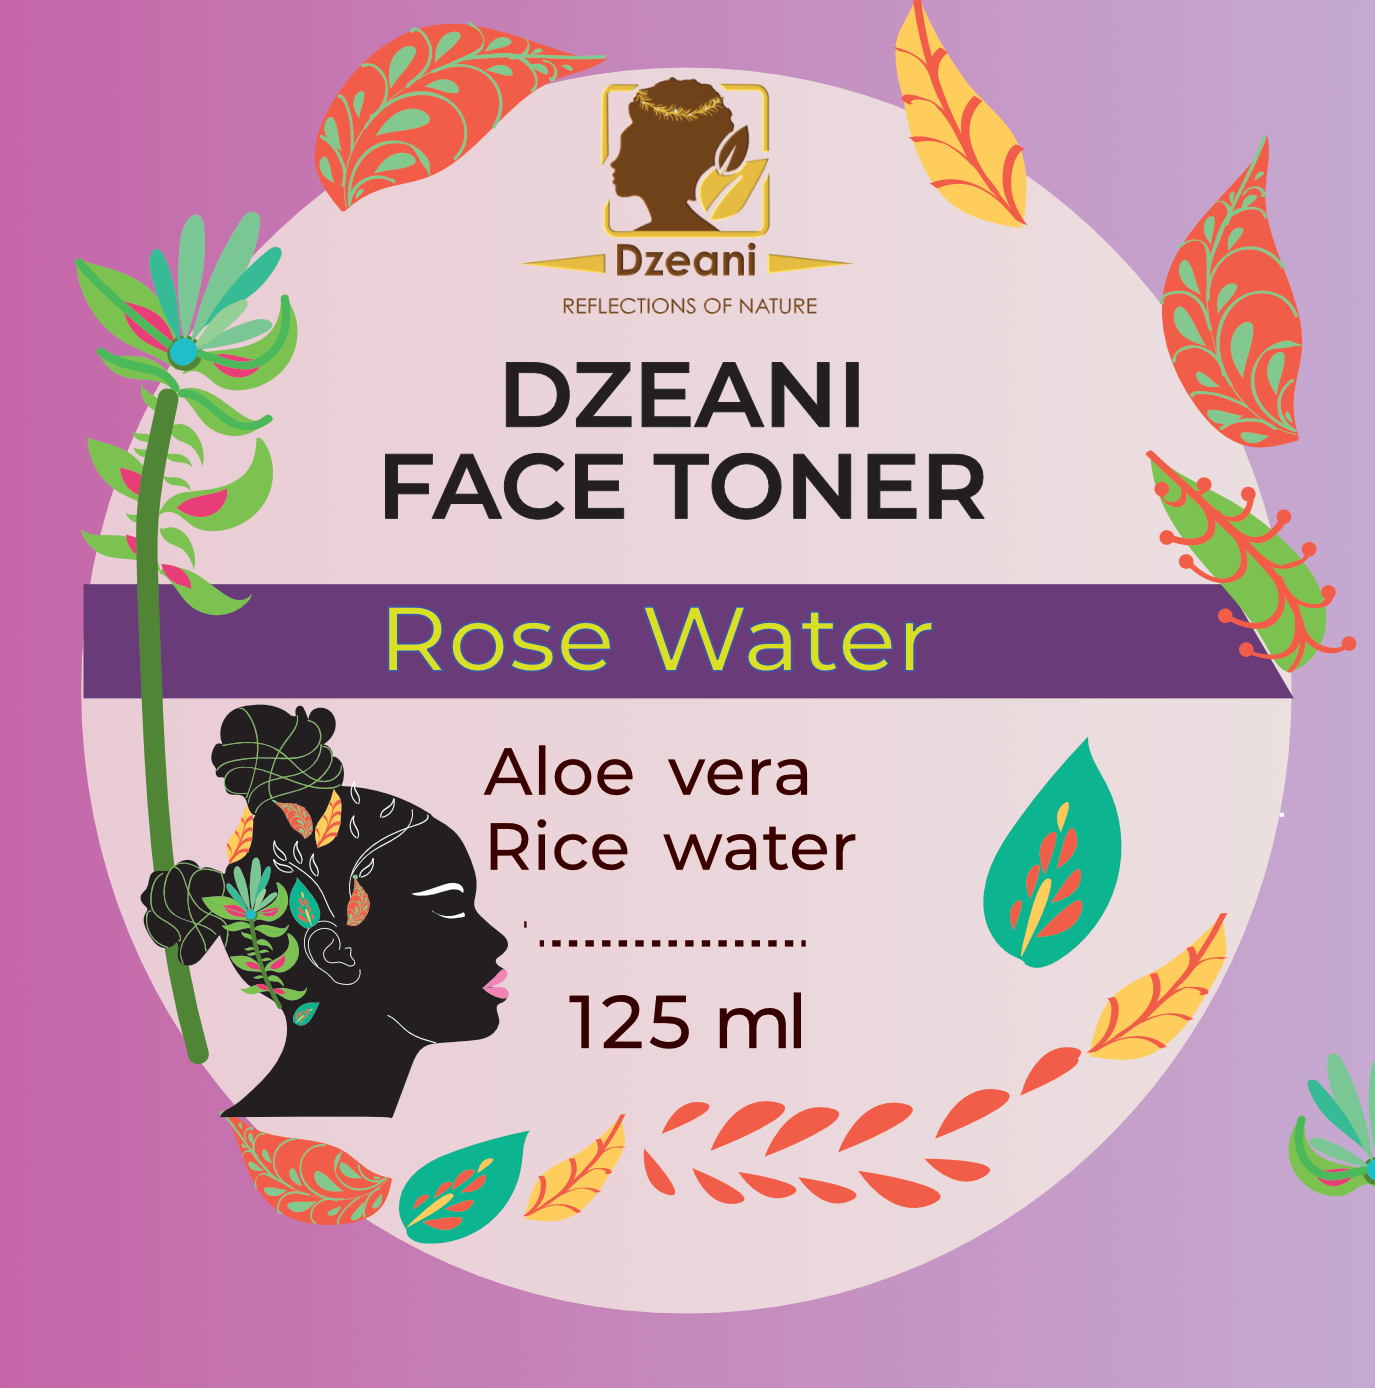 Rejuvenate and nourish your skin with our Dzeani Face Toner. Perfect for completing your daily skin care routine, the lightweight and non-greasy formula absorbs quickly and won't leave your skin feeling dry